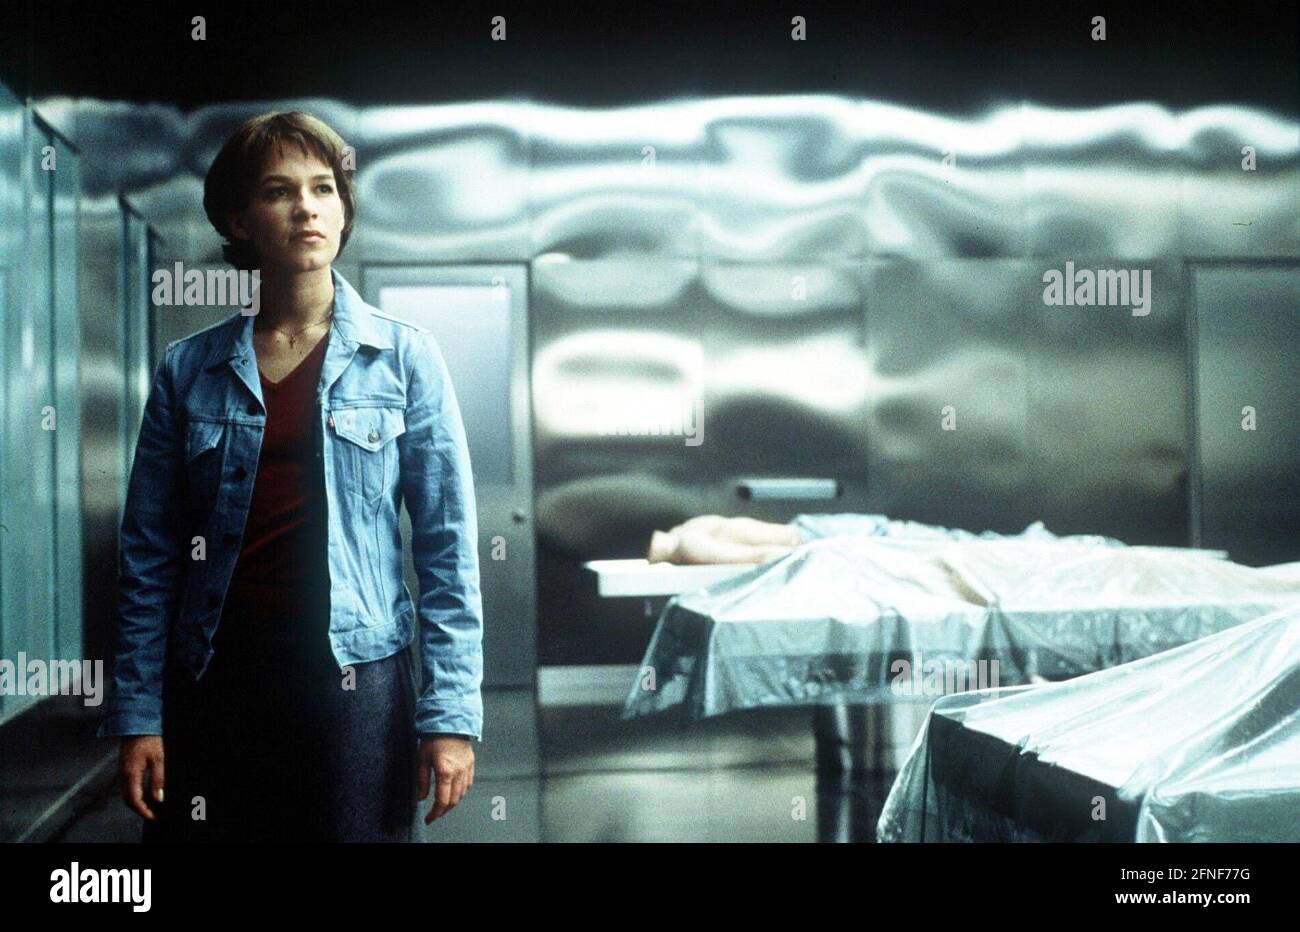 'Stefan Ruzowitzky's highly suspenseful horror flick ''ANATOMY'' will be shown on German television for the first time (ProSieben, November 16, 2002, 10:15 p.m.). The female lead in the film, produced in 1999, is played by FRANKA POTENTE (28, photo), who can be seen in German cinemas in autumn 2002 with ''The Bourne Identity''. As the striving, somewhat out-of-life medical student Paula, she desperately tries to find out the secret behind a strange death... Other leading roles were played by Benno Fürmann, Anna Loos and Sebastian Blomberg. [automated translation]' Stock Photo